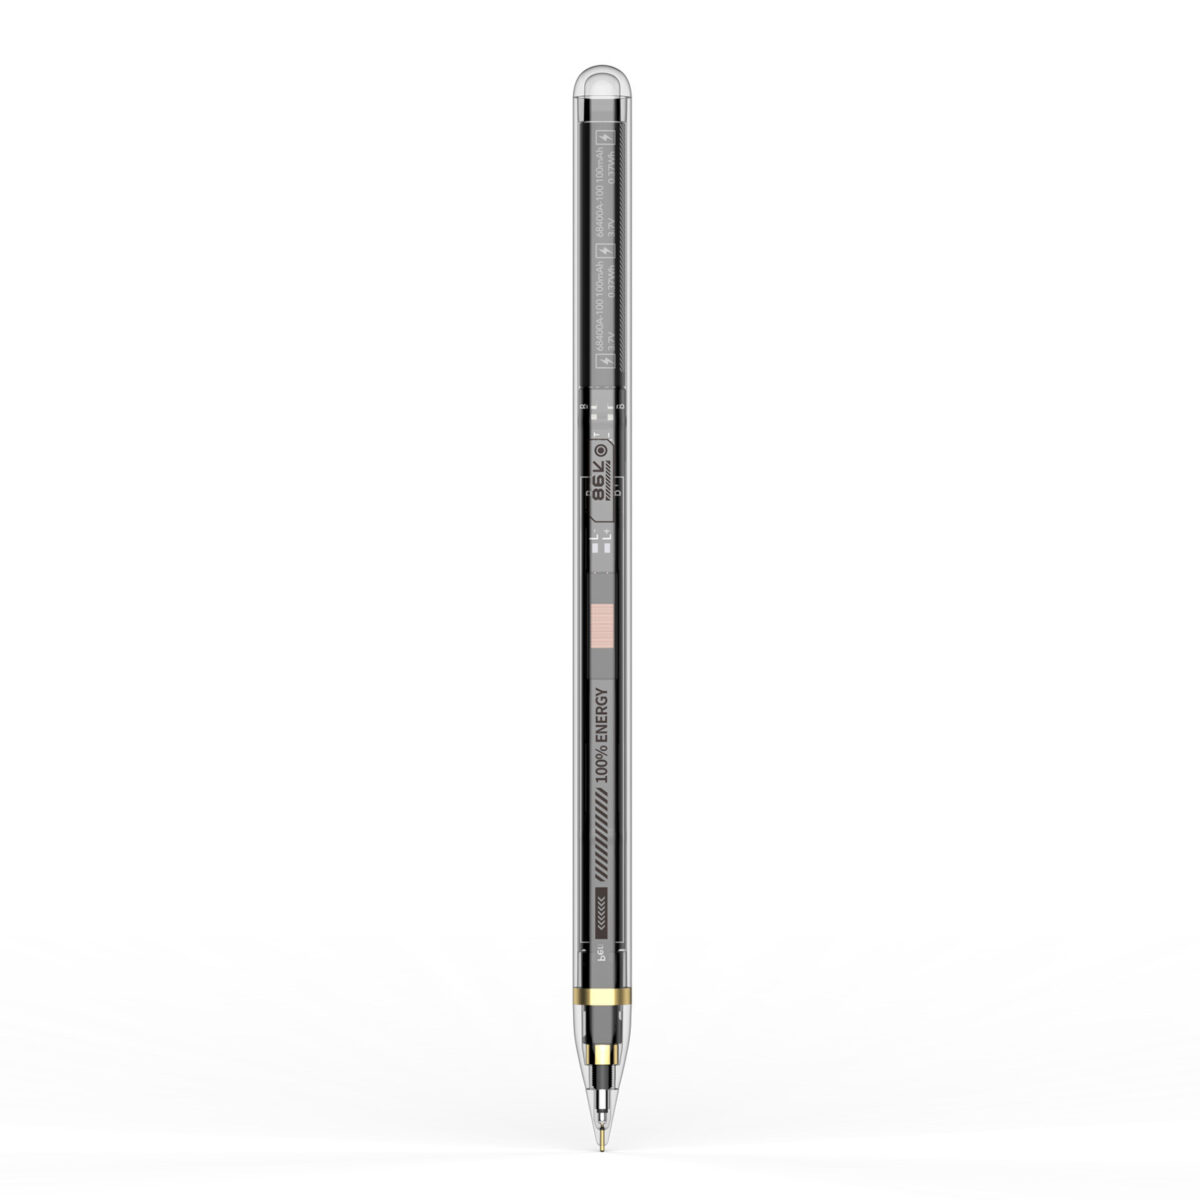 SP-04 Transparent Stylus Pen with Wireless Charging and Power Display